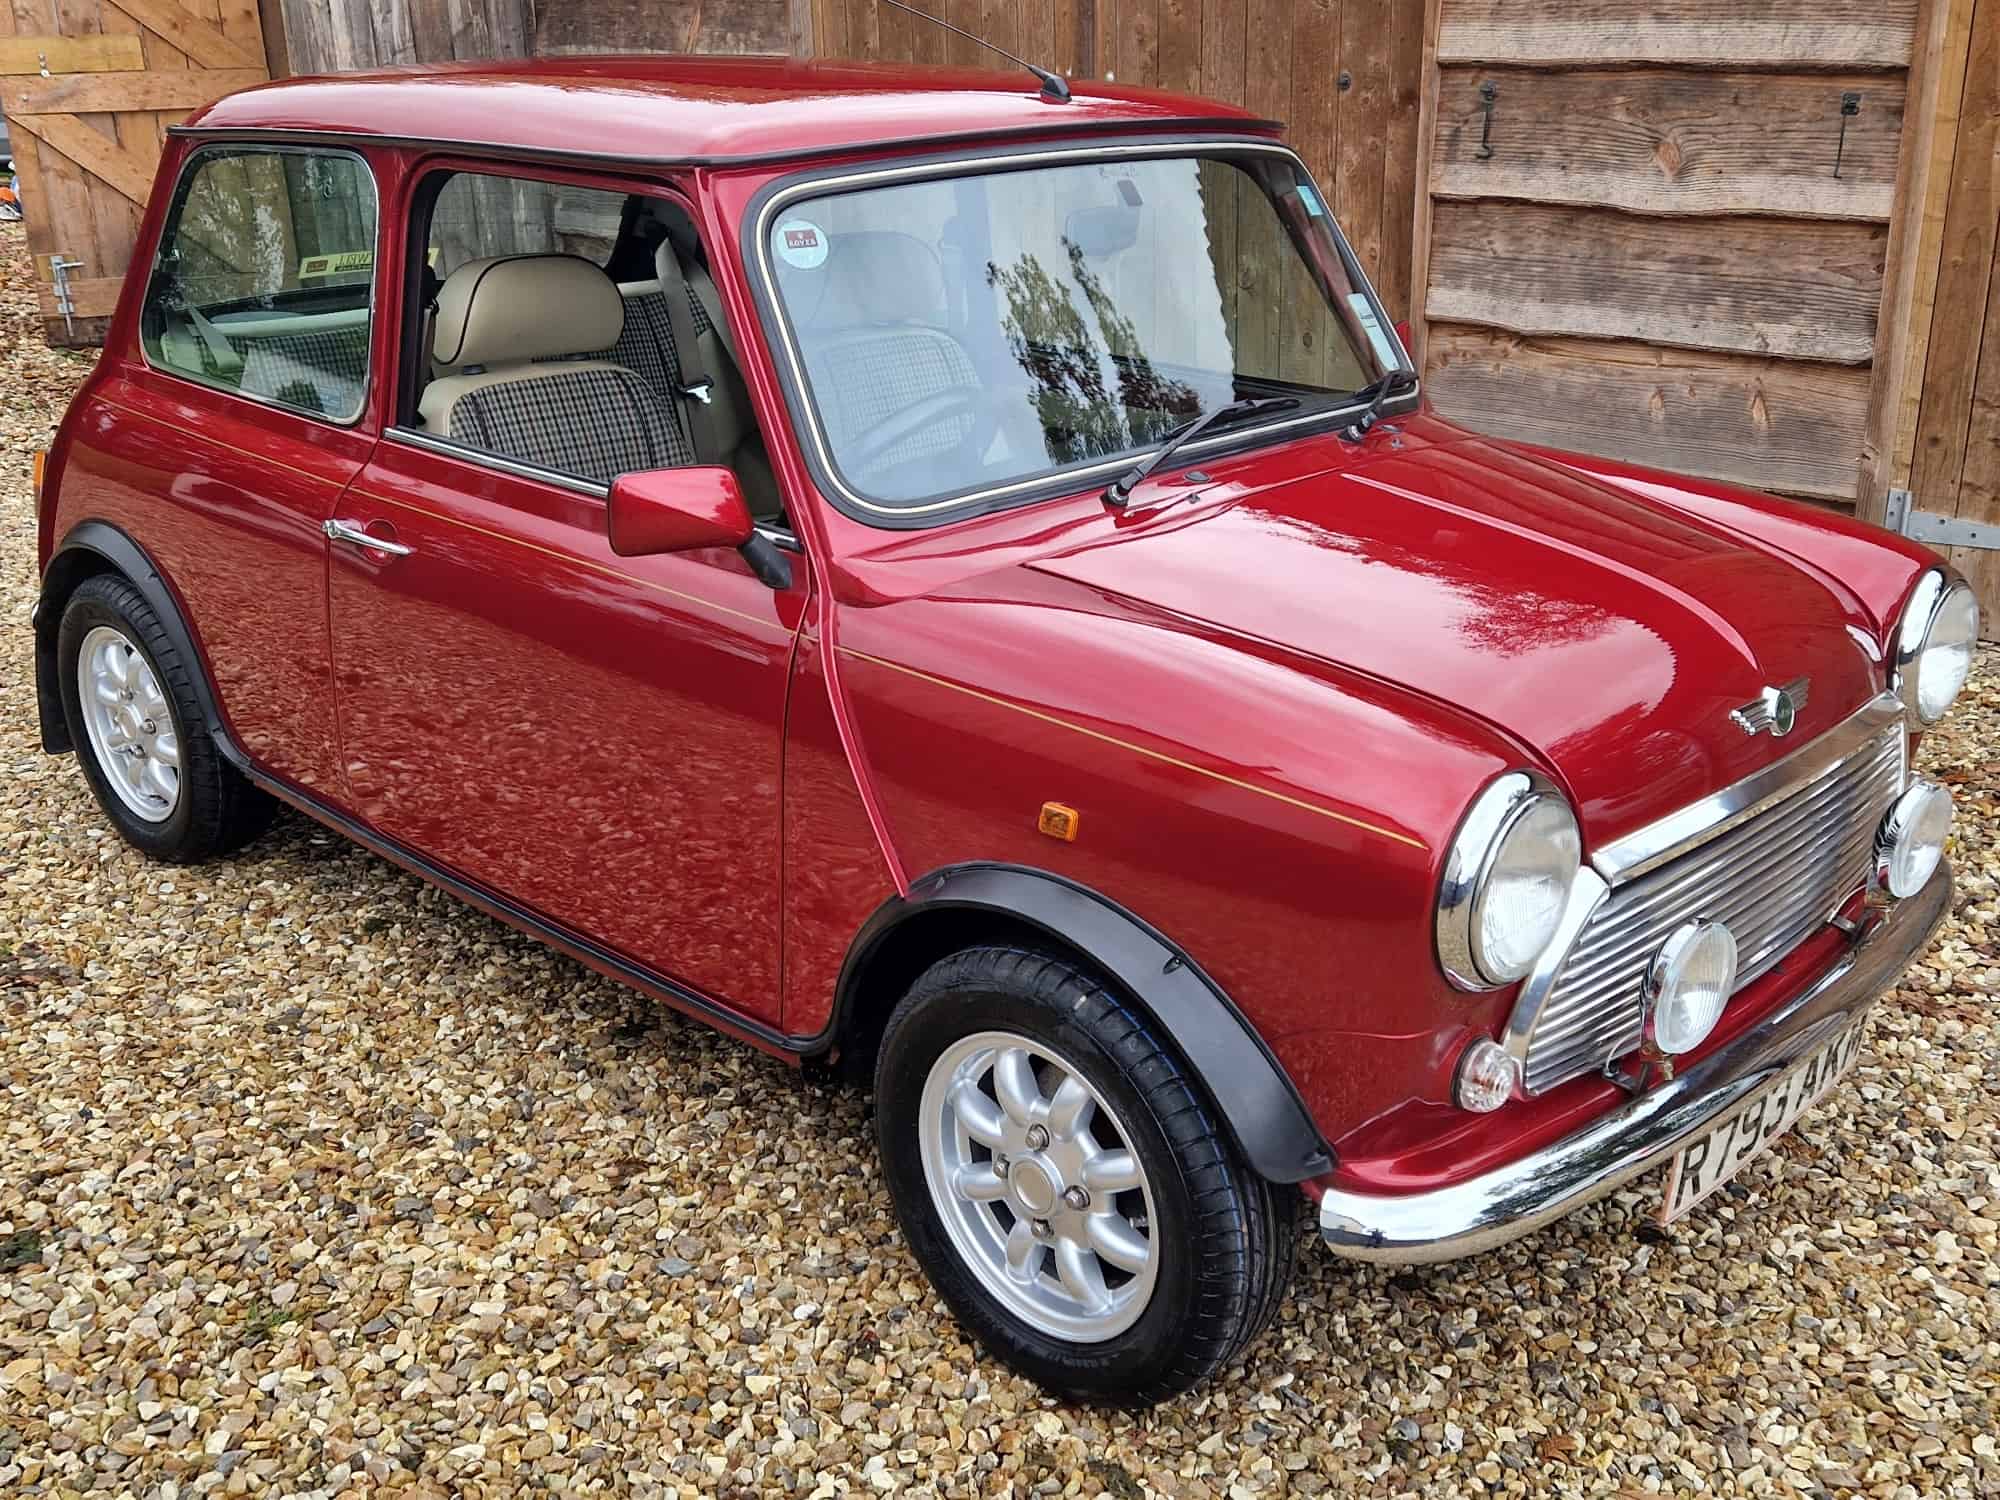 ** COMING SOON ** 1997 Rover Mini 1.3 MPI In Nightfire Red On Just 5990 Miles From New!